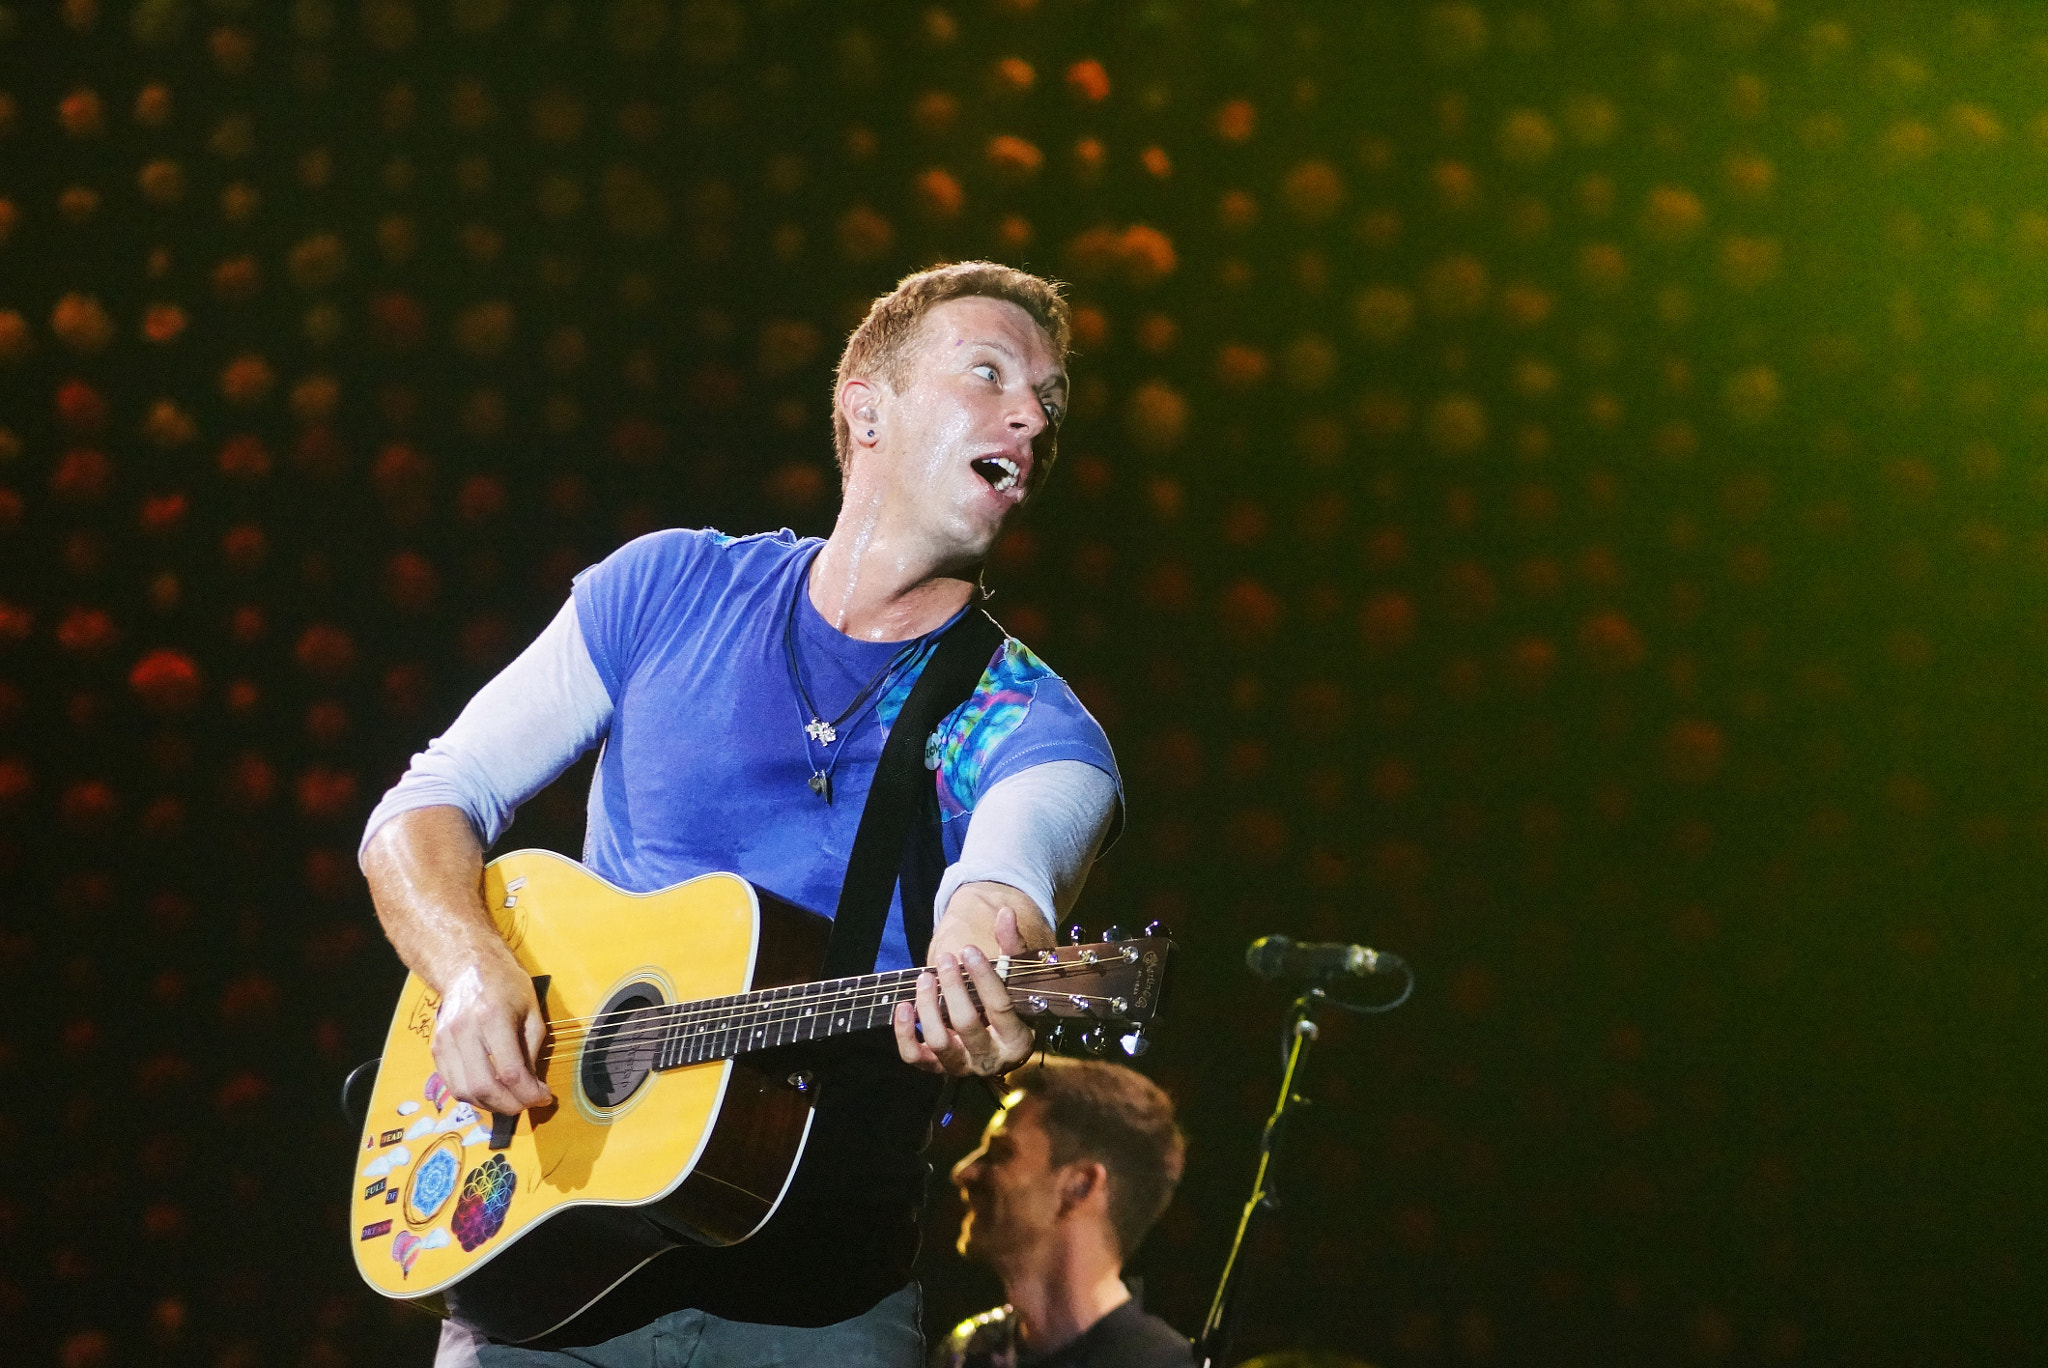 Sony SLT-A77 sample photo. Coldplay photography